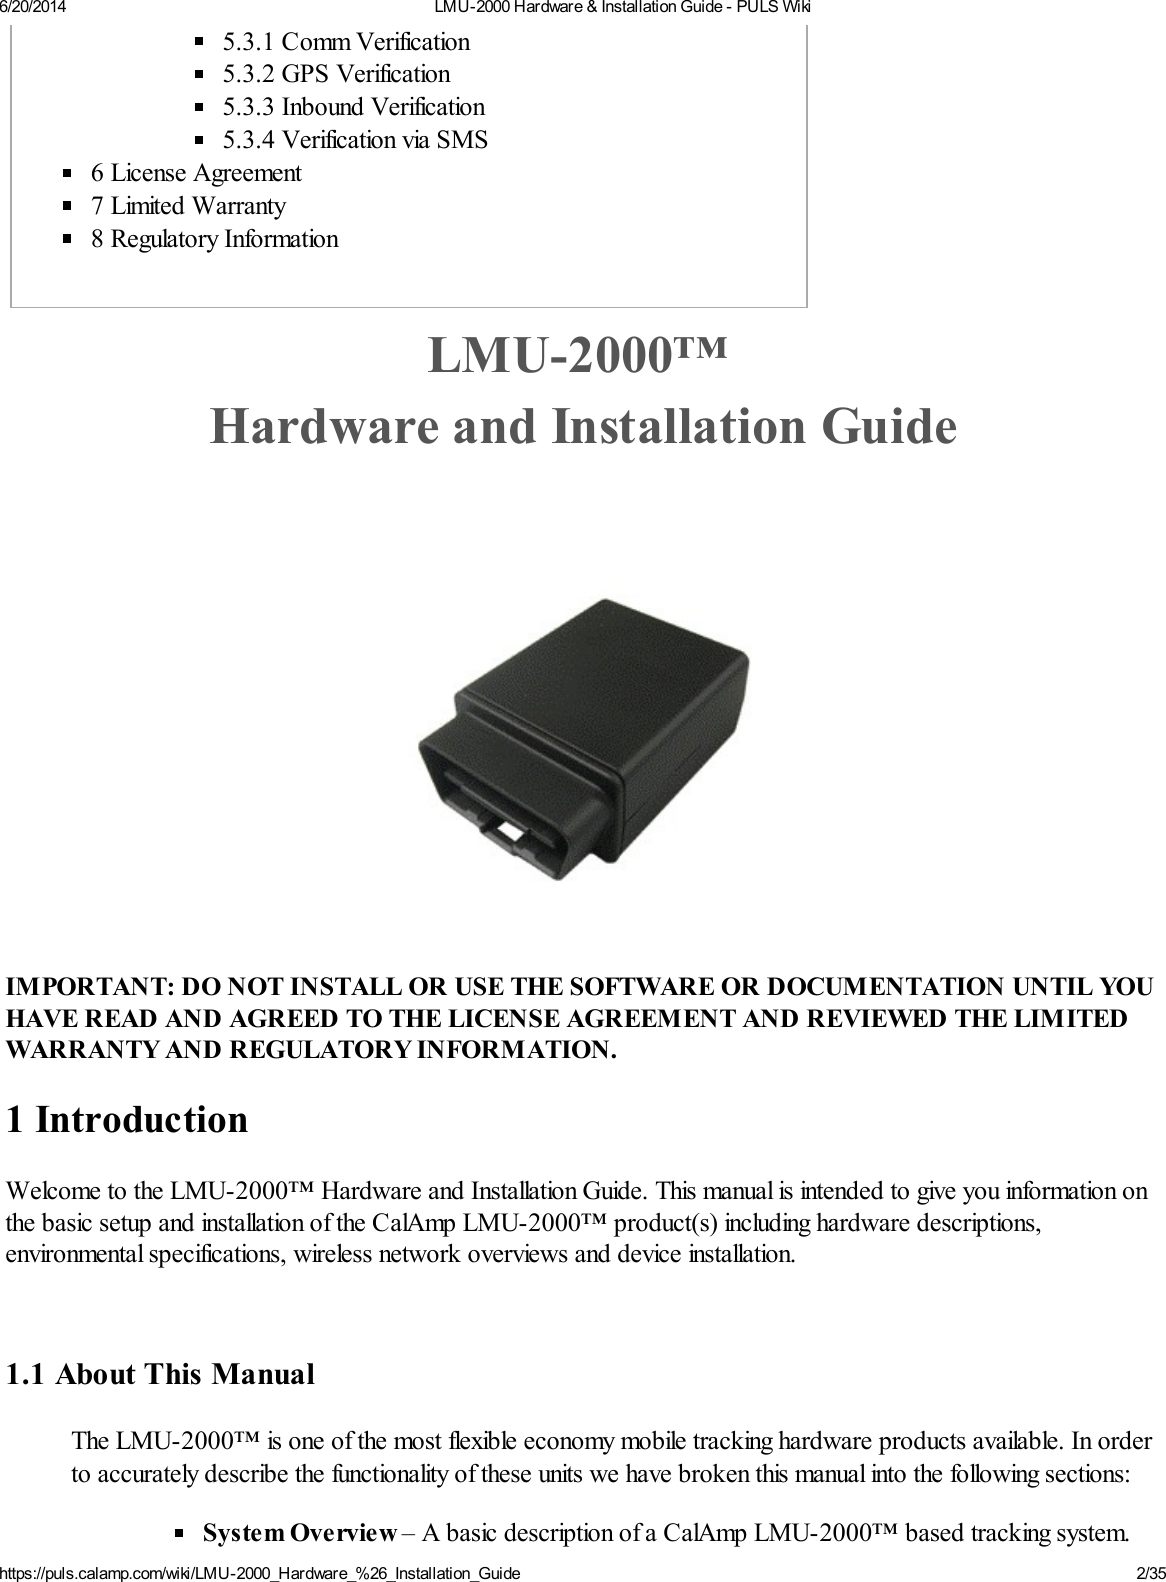 6/20/2014 LMU-2000 Hardware &amp; Installation Guide - PULS Wikihttps://puls.calamp.com/wiki/LMU-2000_Hardware_%26_Installation_Guide 2/355.3.1 Comm Verification5.3.2 GPS Verification5.3.3 Inbound Verification5.3.4 Verification via SMS6 License Agreement7 Limited Warranty8 Regulatory InformationLMU-2000™ Hardware and Installation GuideIMPORTANT: DO NOT INSTALL OR USE THE SOFTWARE OR DOCUMENTATION UNTIL YOUHAVE READ AND AGREED TO THE LICENSE AGREEMENT AND REVIEWED THE LIMITEDWARRANTY AND REGULATORY INFORMATION.1 IntroductionWelcome to the LMU-2000™ Hardware and Installation Guide. This manual is intended to give you information onthe basic setup and installation of the CalAmp LMU-2000™ product(s) including hardware descriptions,environmental specifications, wireless network overviews and device installation.1.1 About This ManualThe LMU-2000™ is one of the most flexible economy mobile tracking hardware products available. In orderto accurately describe the functionality of these units we have broken this manual into the following sections:System Overview – A basic description of a CalAmp LMU-2000™ based tracking system.